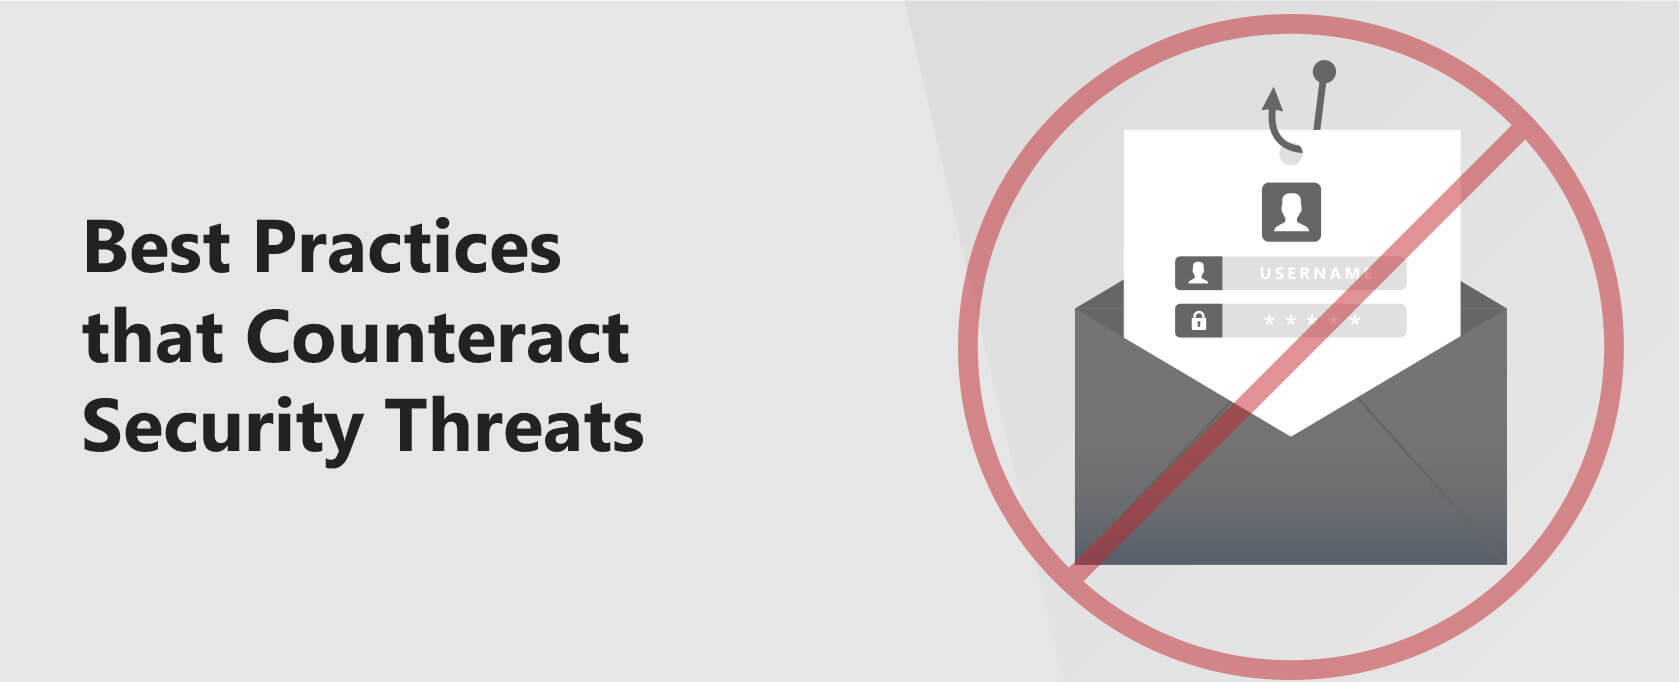 Best Practices that Counteract Security Threats